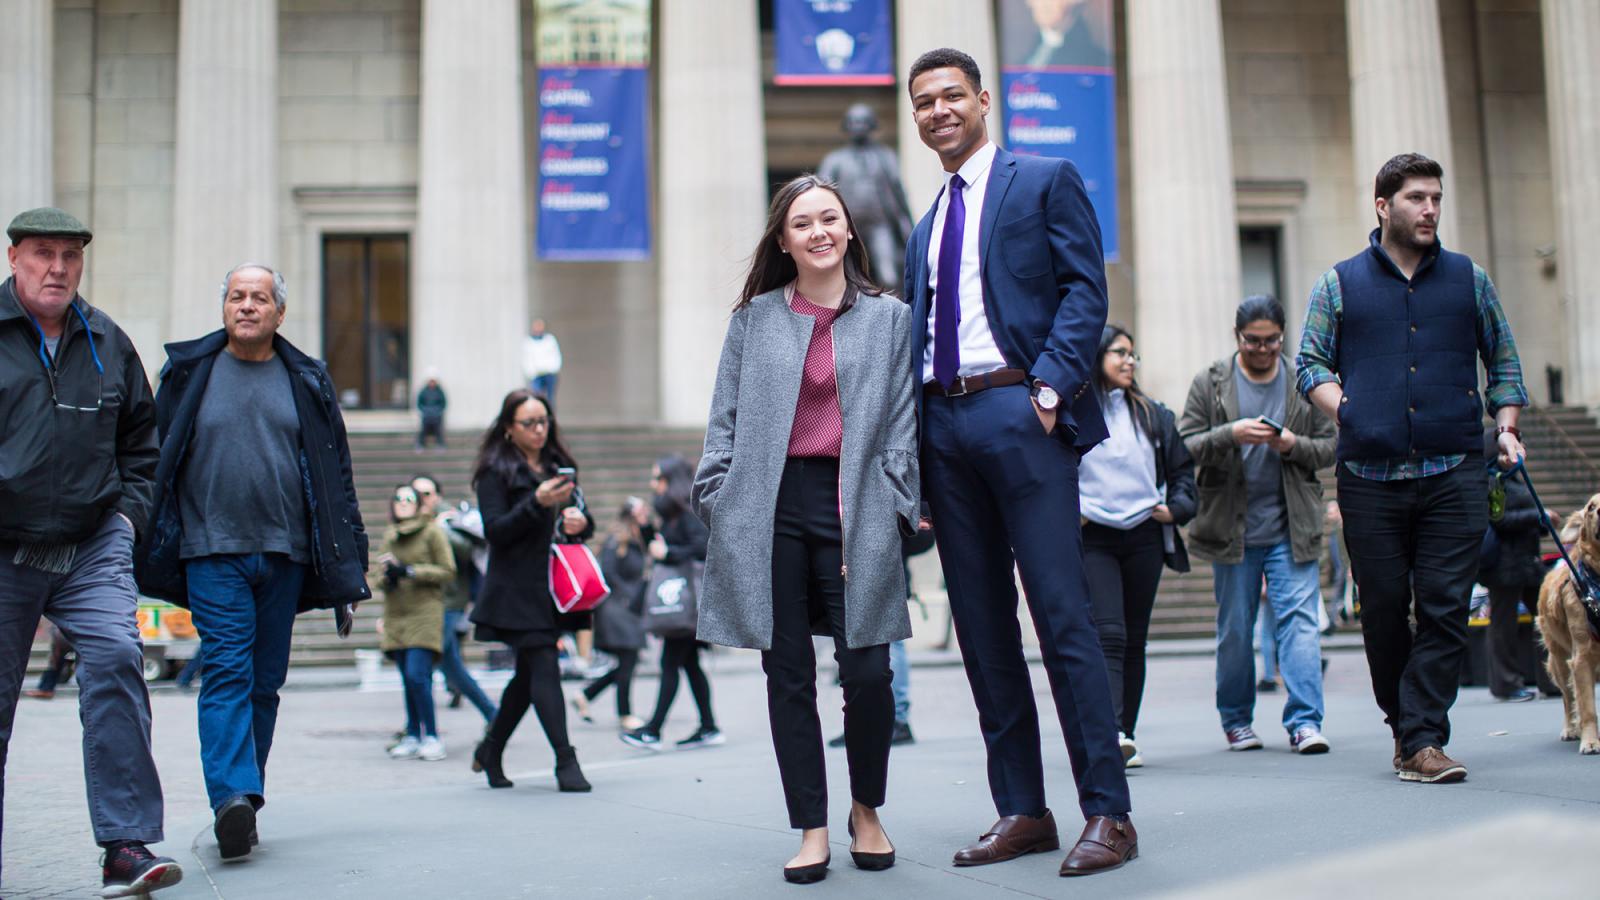 Two people dressed in business attire walking in NYC